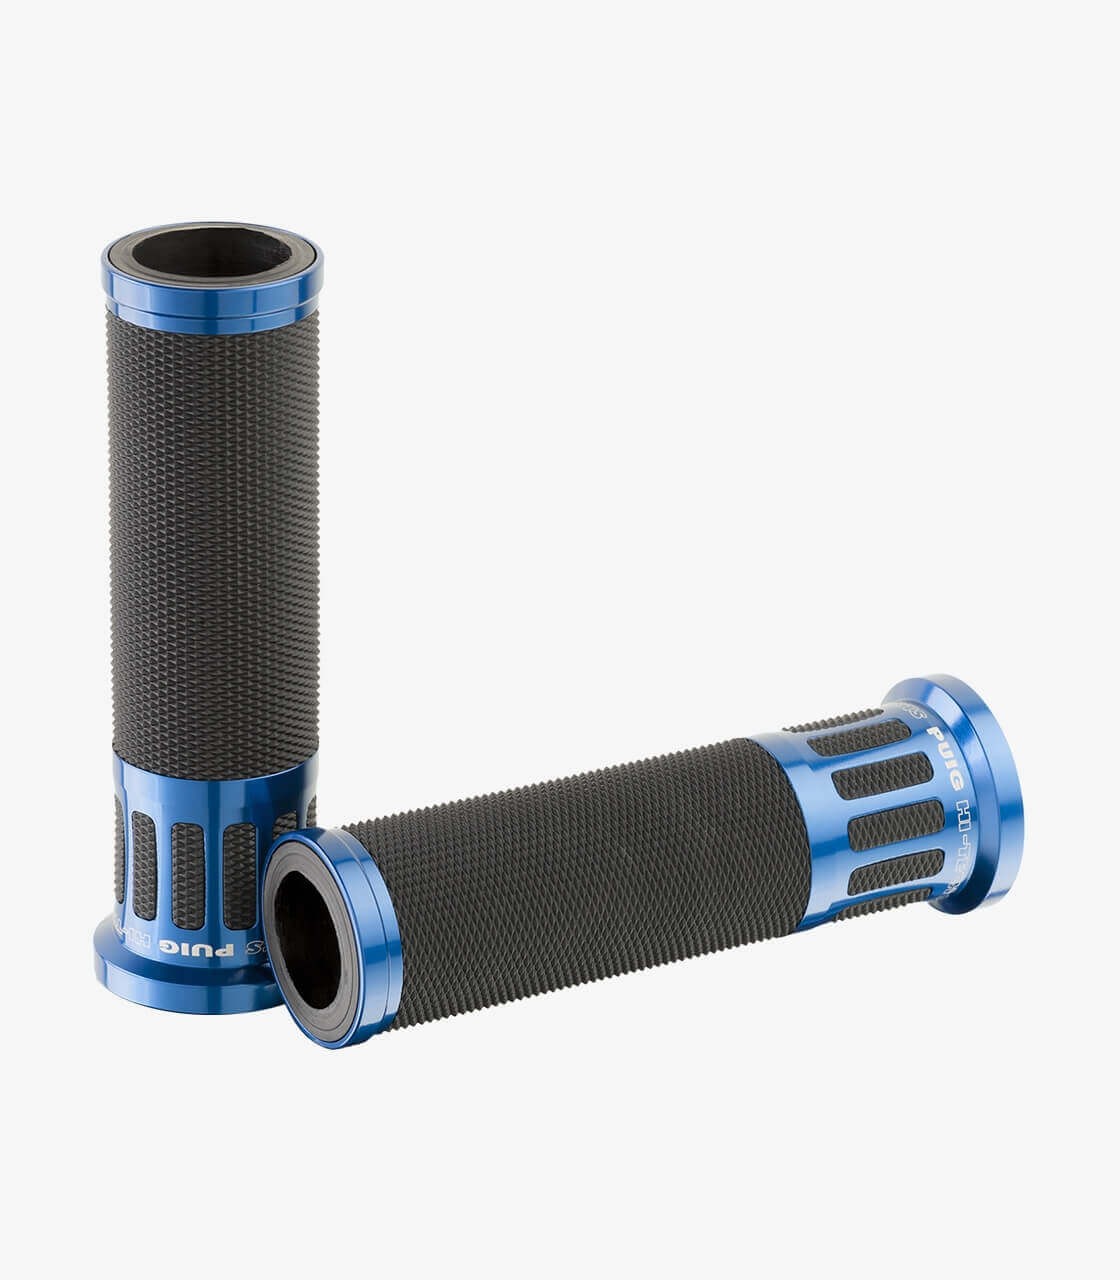 Blue Racing motorcycle grips by Puig - 5879A - 47,80